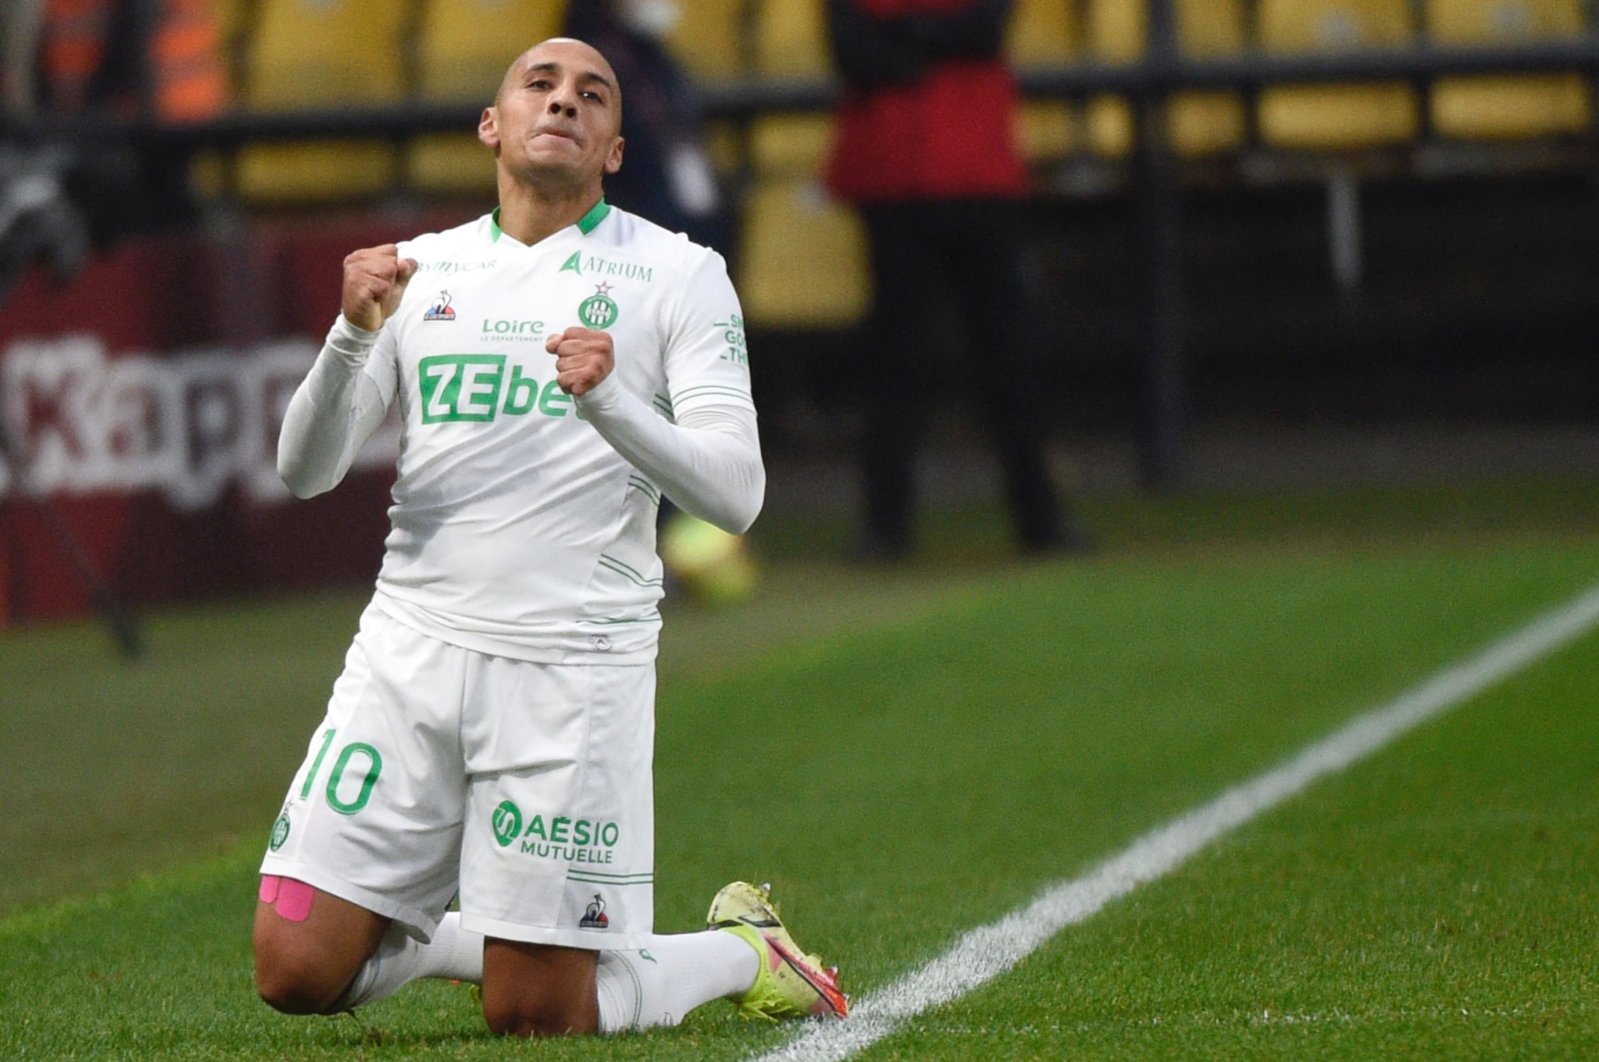 Saint-Etienne's Tunisian French midfielder Wahbi Khazri celebrates scoring his team's first goal during the French L1 football match between Metz (FC Metz) and Saint-Etienne at Saint-Symphorien stadium, in Longeville-les-Metz, France, Oct. 30, 2021. (AFP Photo)